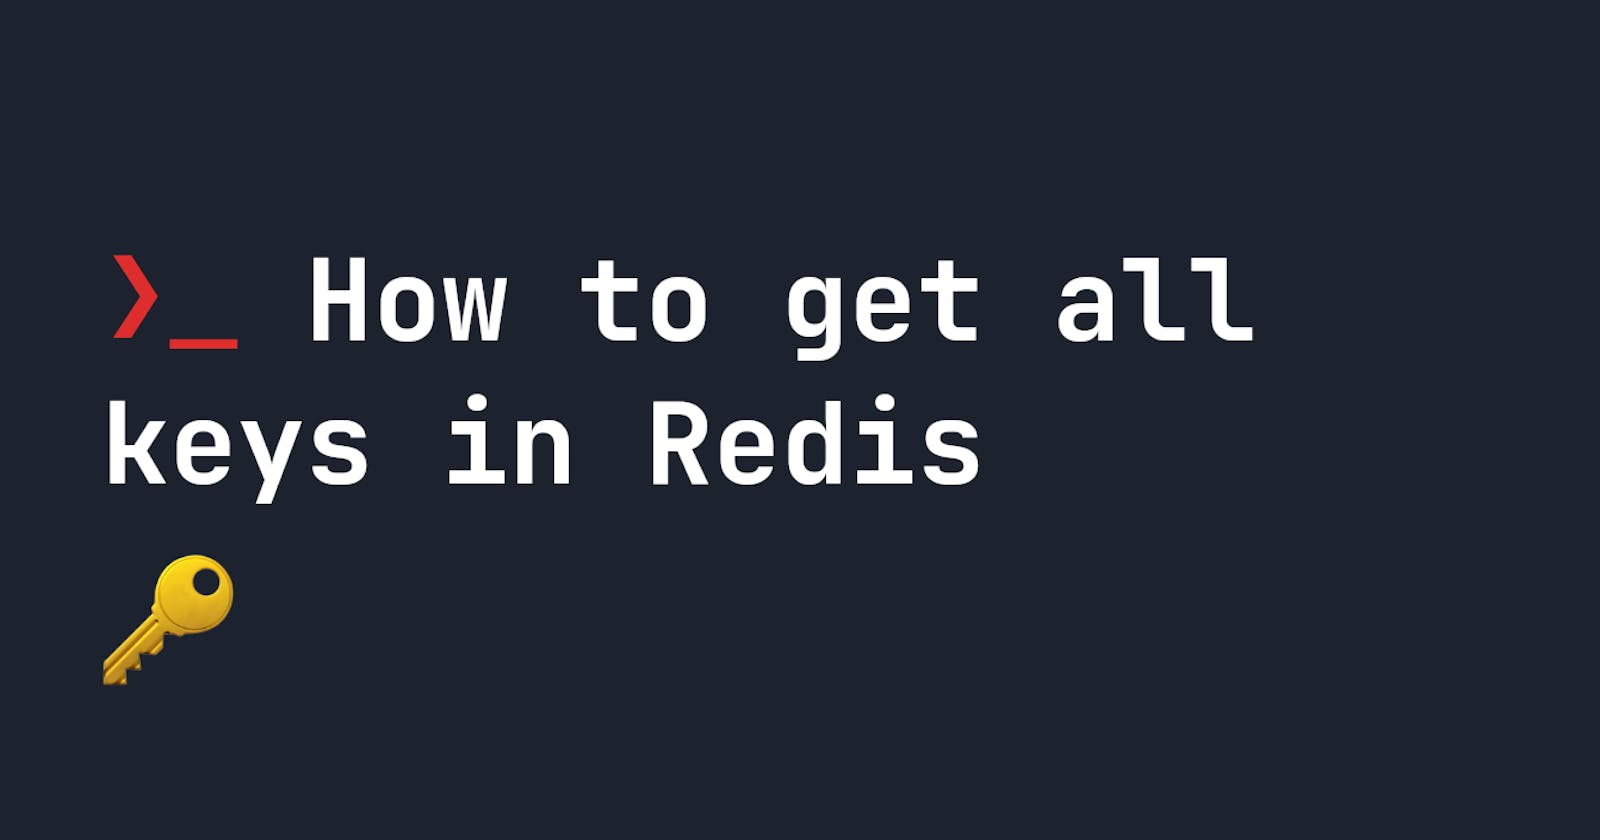 How to get all keys in Redis